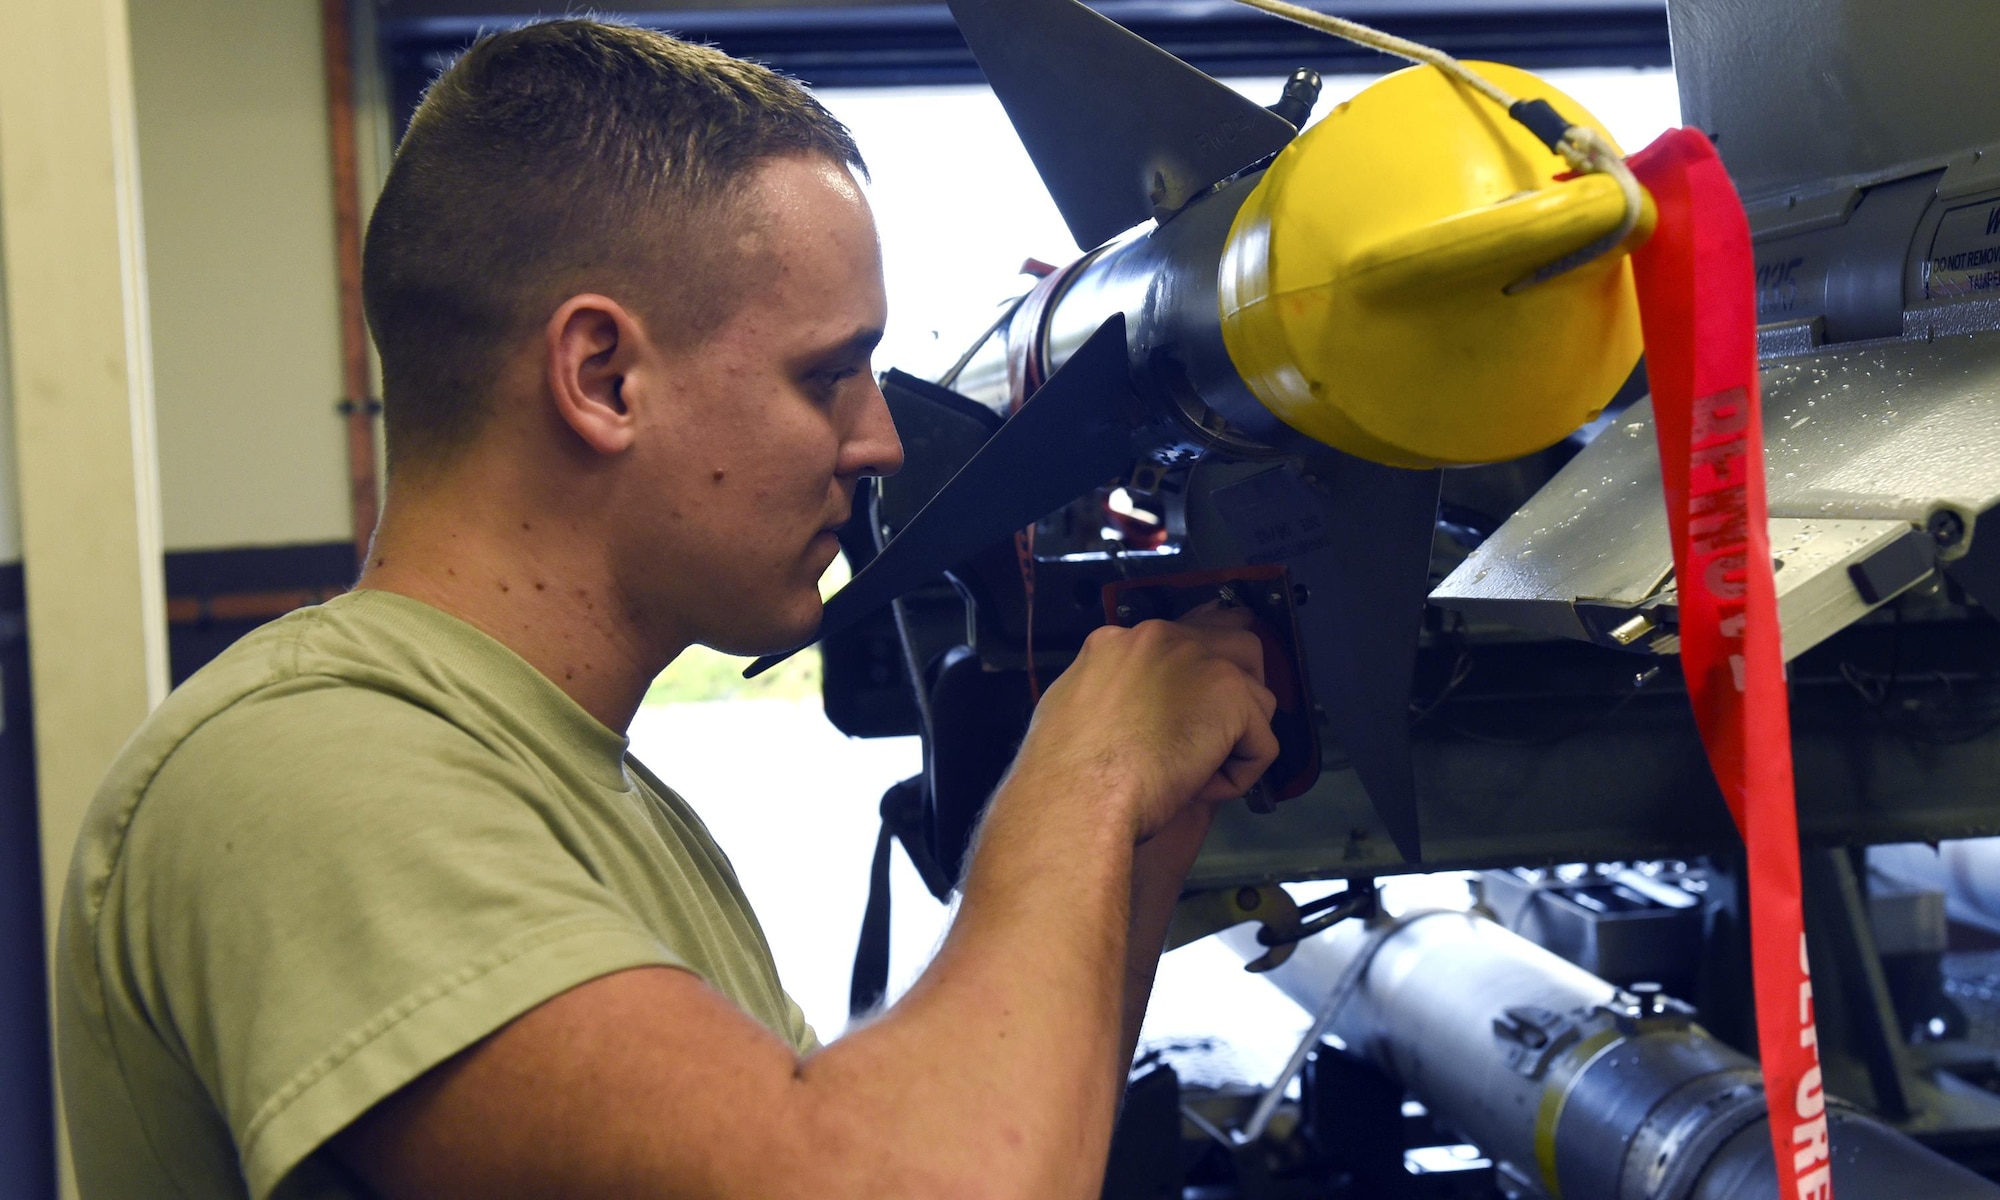 U.S. Air Force Senior Airman Bradly Grigg, 325th Maintenance Squadron munitions systems specialist, performs maintenance on a weapons system in preparation for  use in Checkered Flag 17-1 and Combat Archer 17-3 at Tyndall Air Force Base, Fla., Dec. 14, 2016. Tyndall’s Munitions Flight plays a heavy role in supporting multiple exercises and evaluations that the 325th Fighter Wing takes part in throughout each year. (U.S. Air Force photo by Airman 1st Class Cody R. Miller/Released)